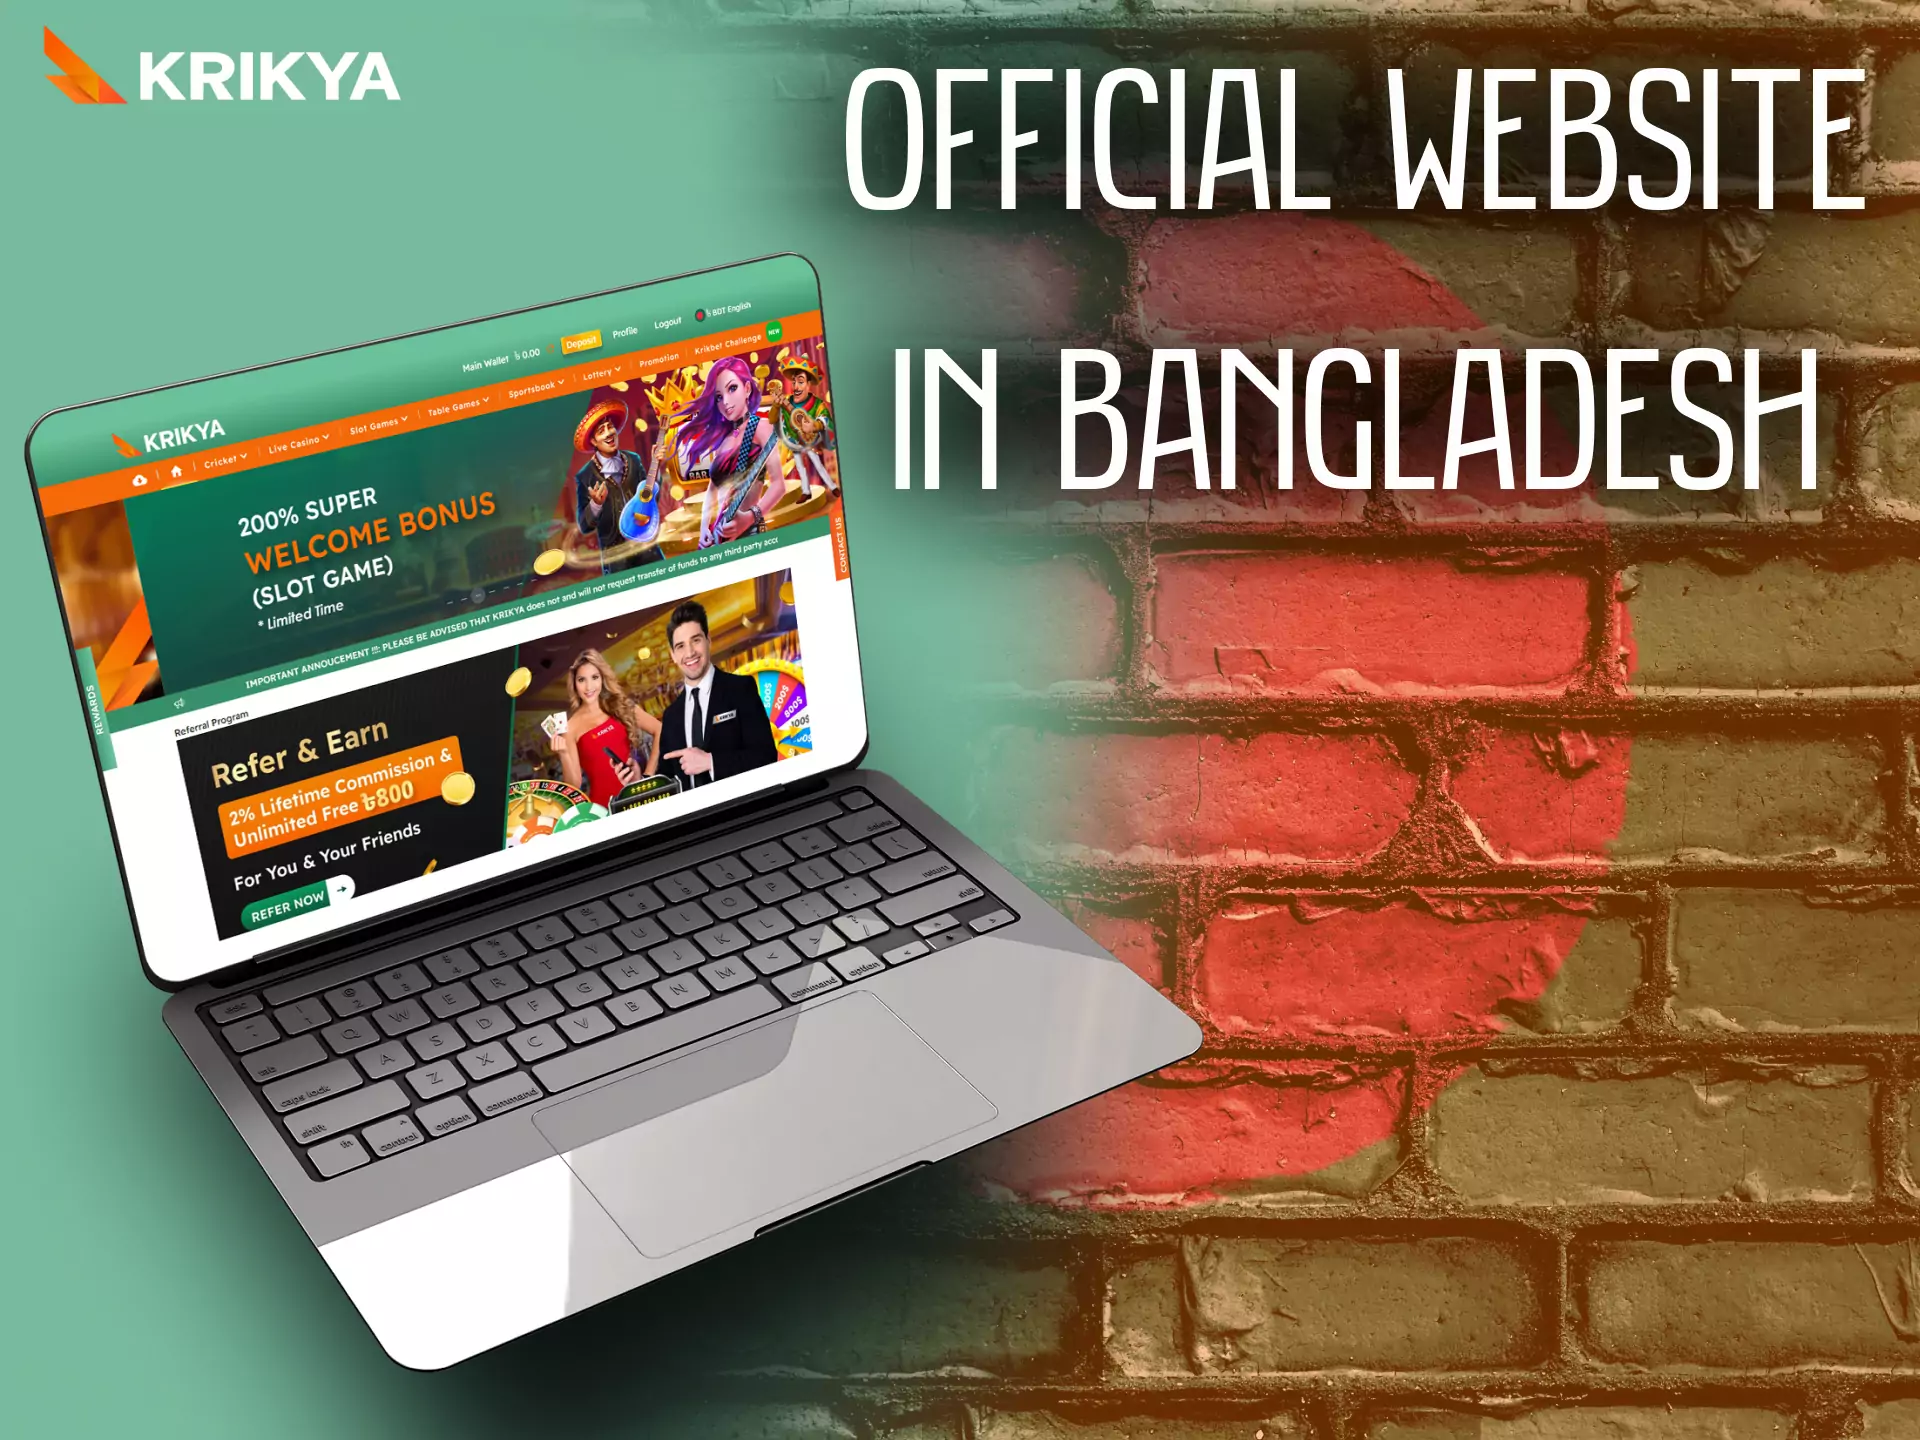 The official website of Krikya in Bangladesh offers many games and bonuses.